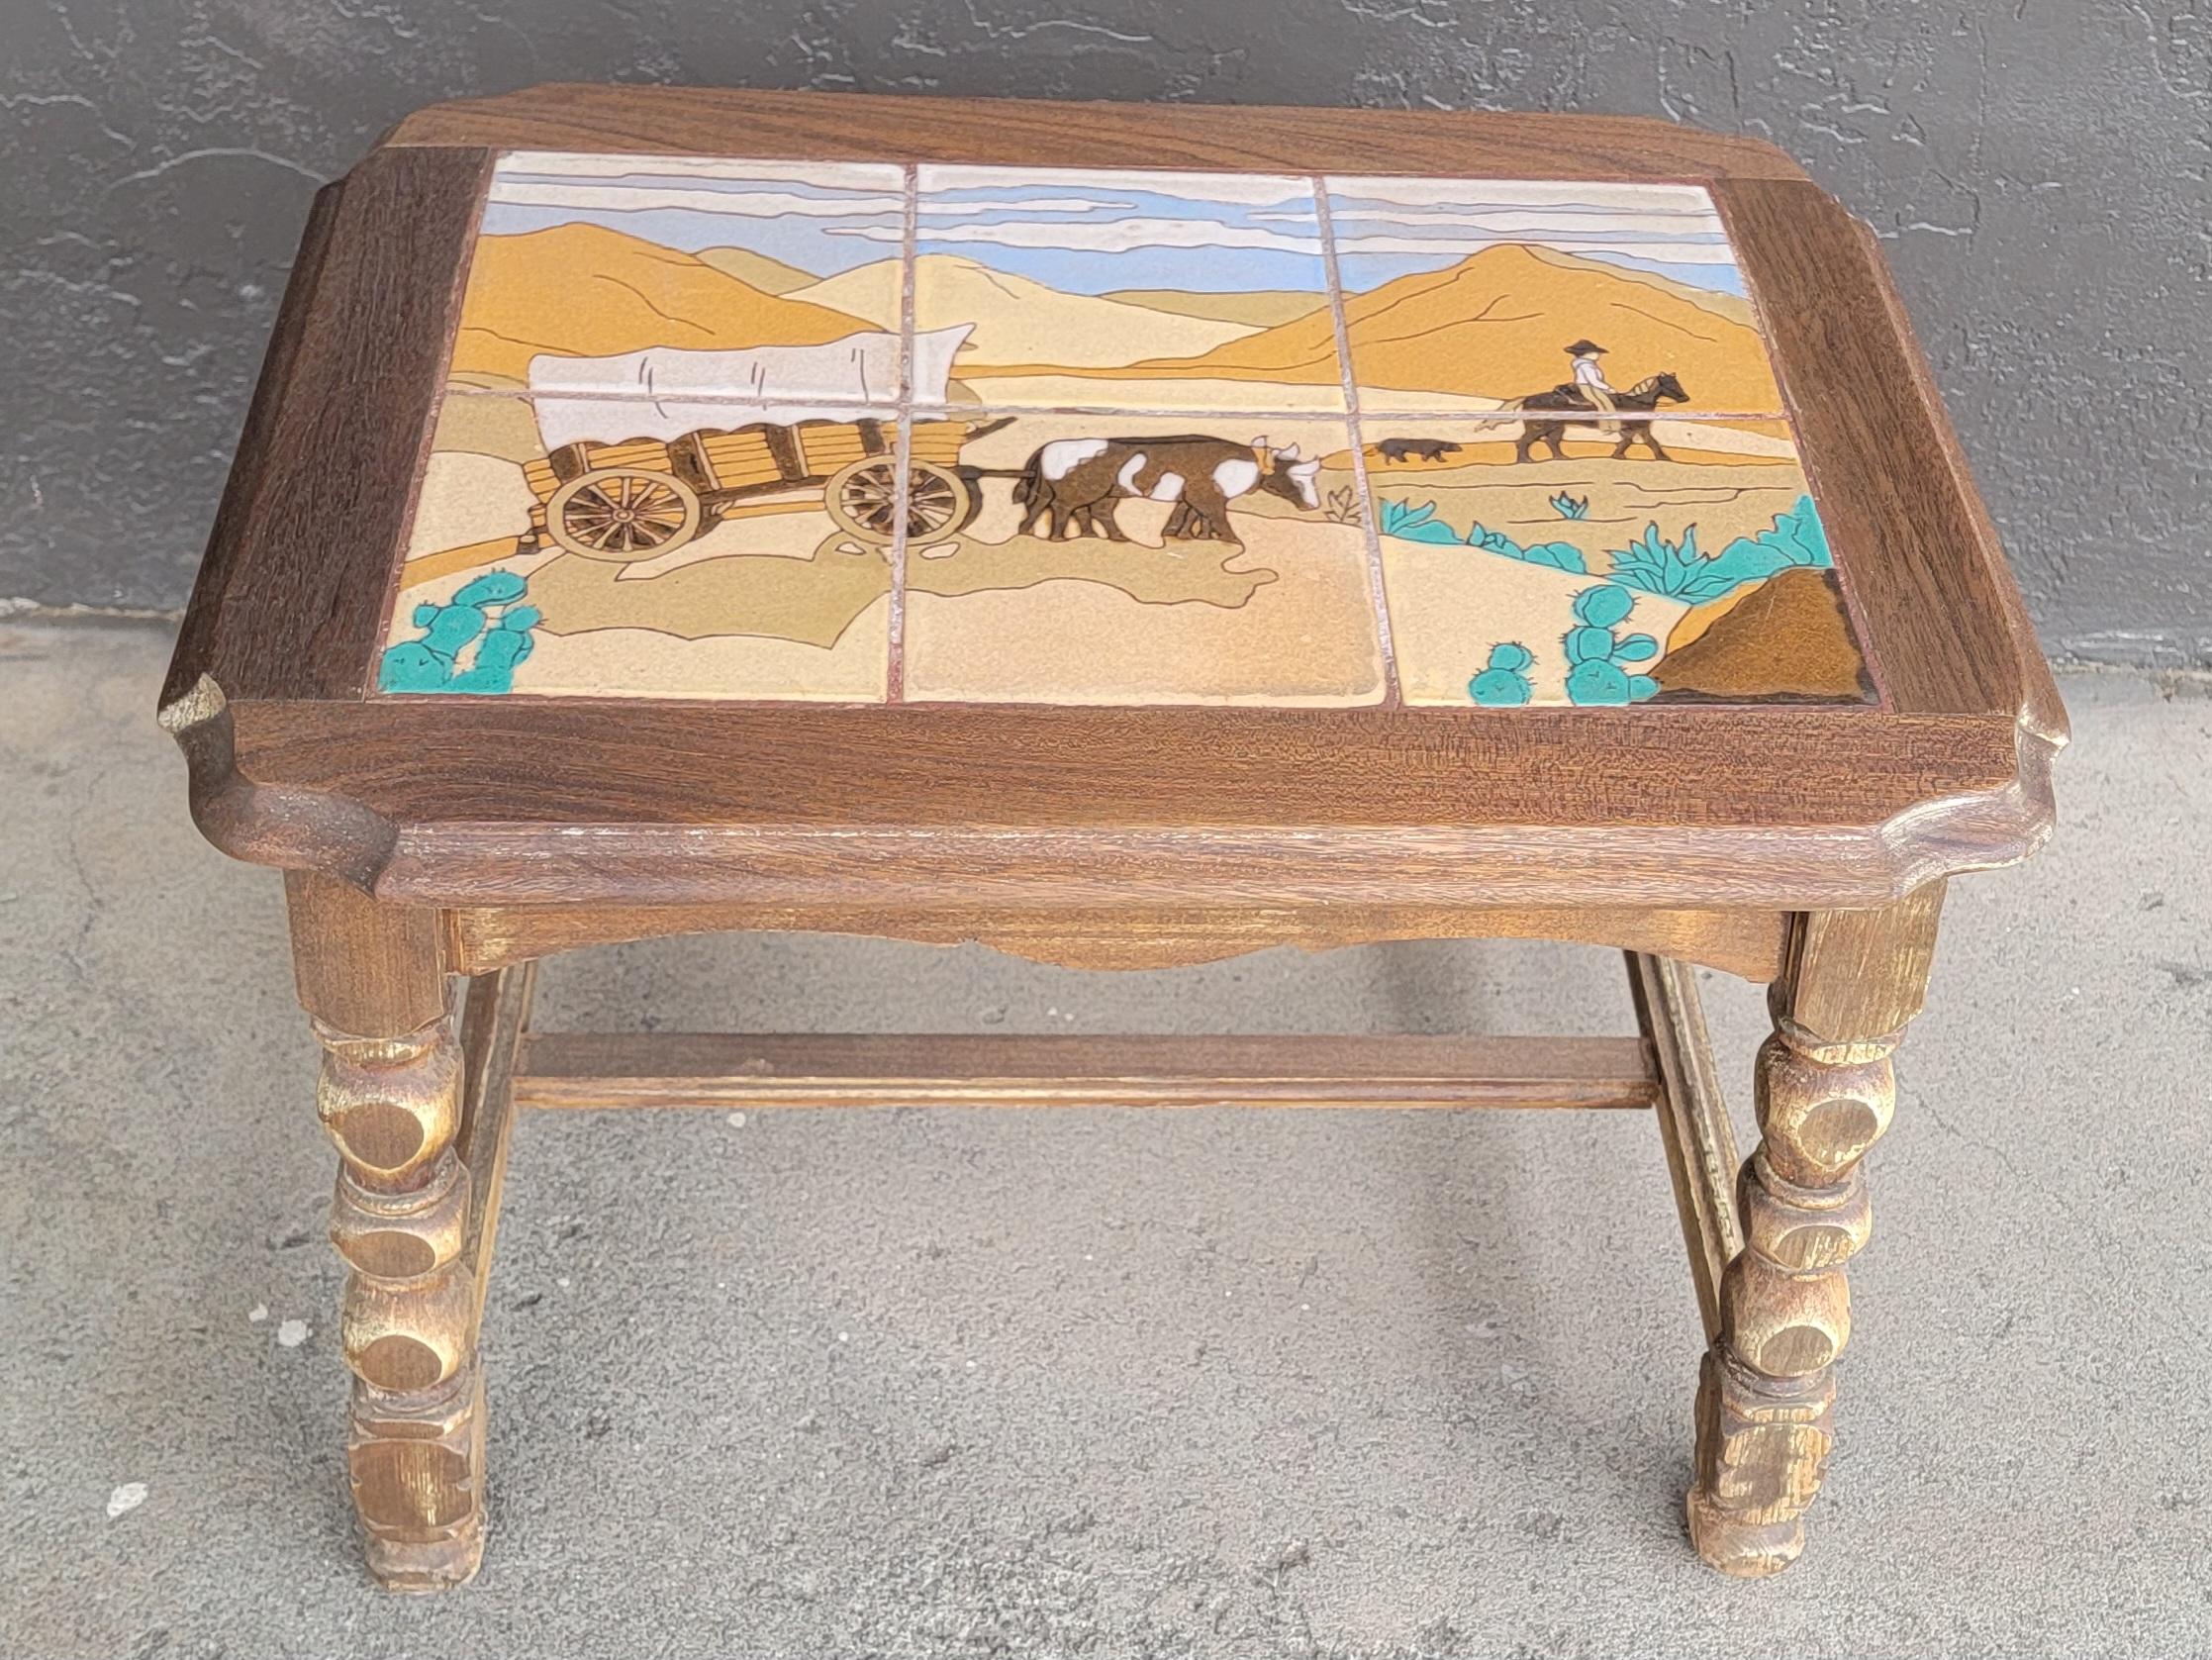 Western motif tile top table by Taylor Tile, California. Circa. 1930's. Depicts a covered wagon pulled by oxen in high desert country, a cowboy on horse with a dog. Cactus and mountain background. Six hand painted glazed tiles mounted to original